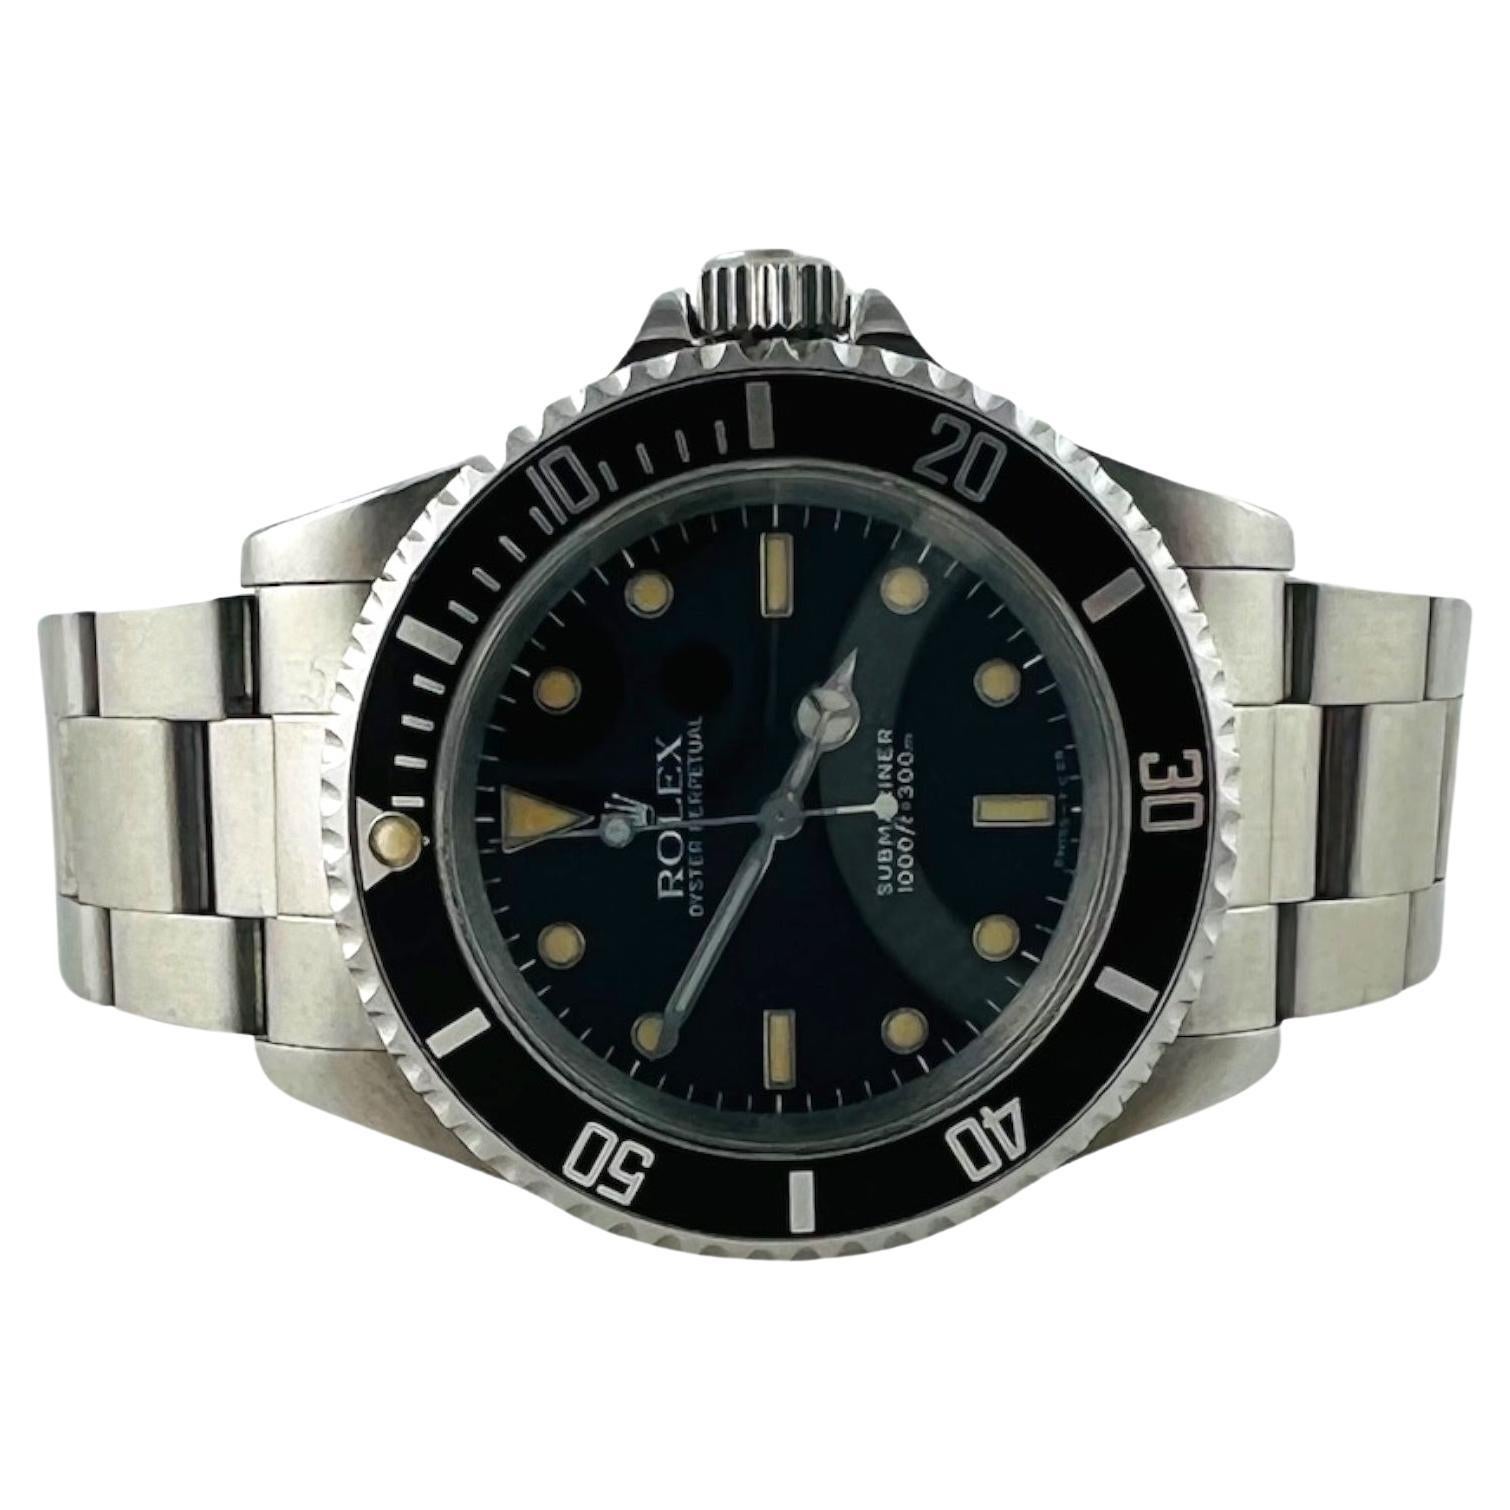 Rolex's Men's Submariner Watch

Model: 14060
Serial: E715498

This classic Rolex submariner with a black dial and black bezel is from 1990

Automatic movement

Stainless steel oyster band - fits up to 7.5